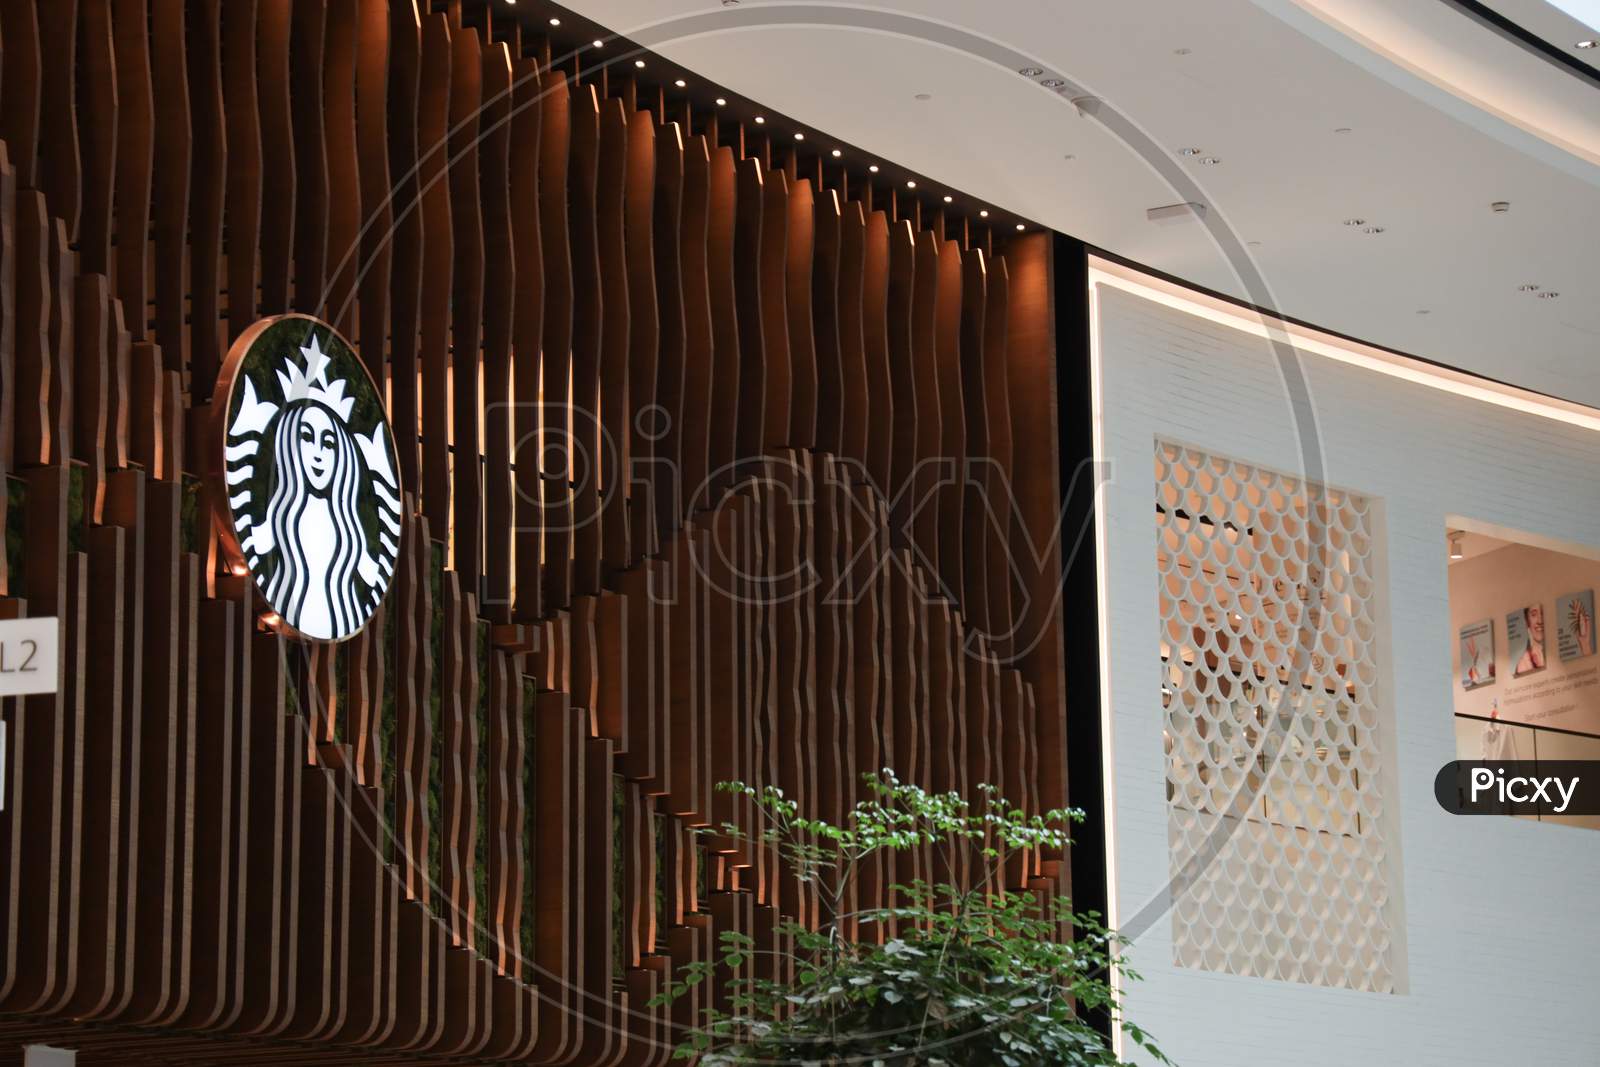 Starbucks  Coffee Outlet At Changi Airport, Singapore